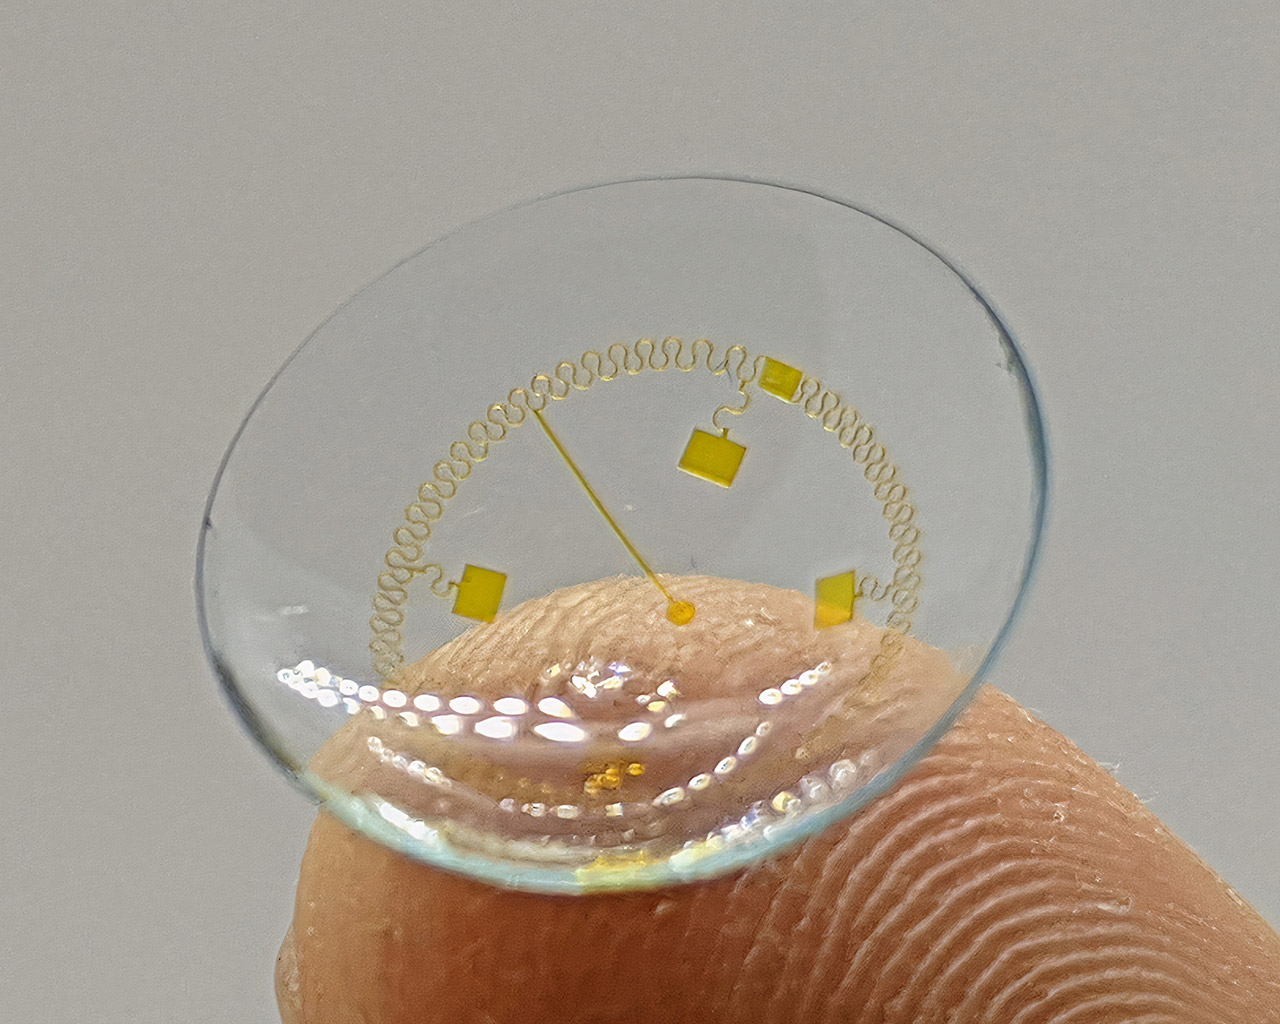 InWith Unveils World’s First Electronic Contact Lens with an Augmented Reality Vision Chip for the Metaverse – TechEBlog